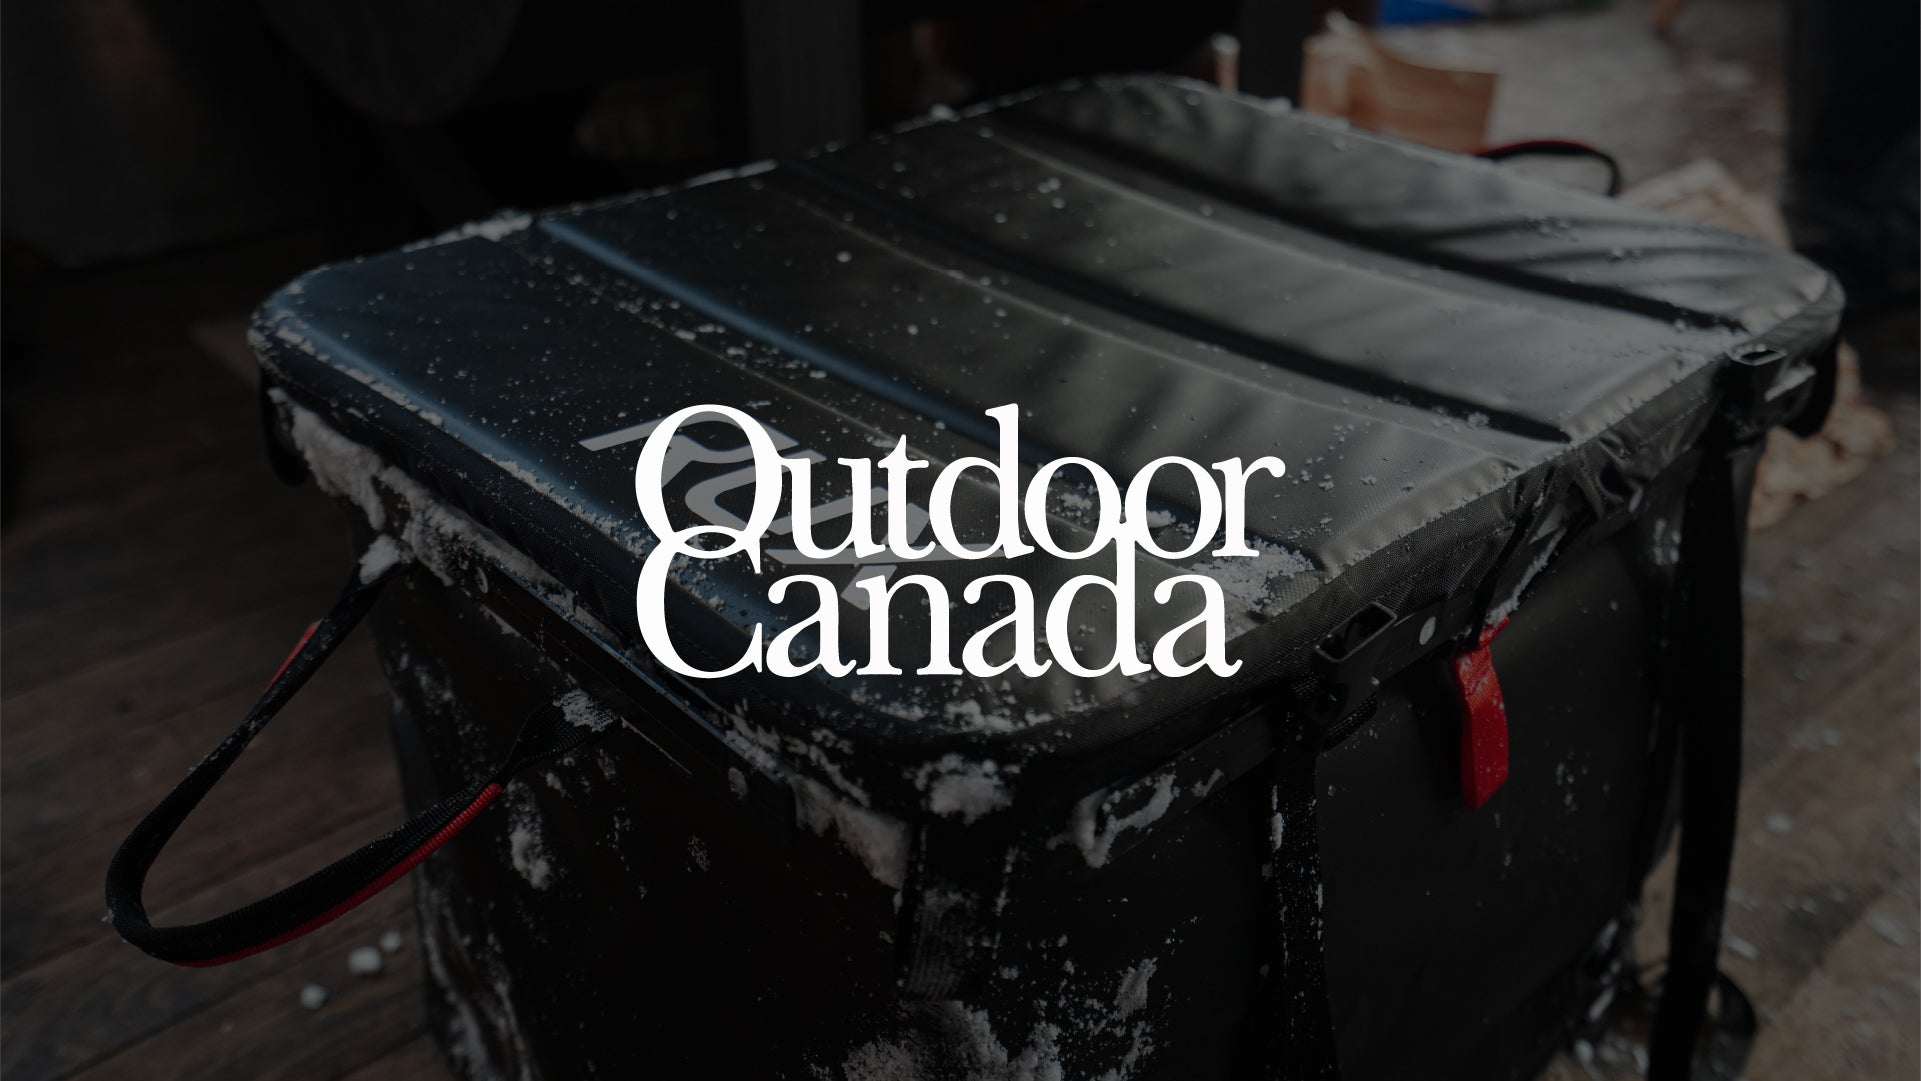 The RUX 70L is Featured in Outdoor Canada’s Picks for Fishing, Hunting and Outdoor Adventure